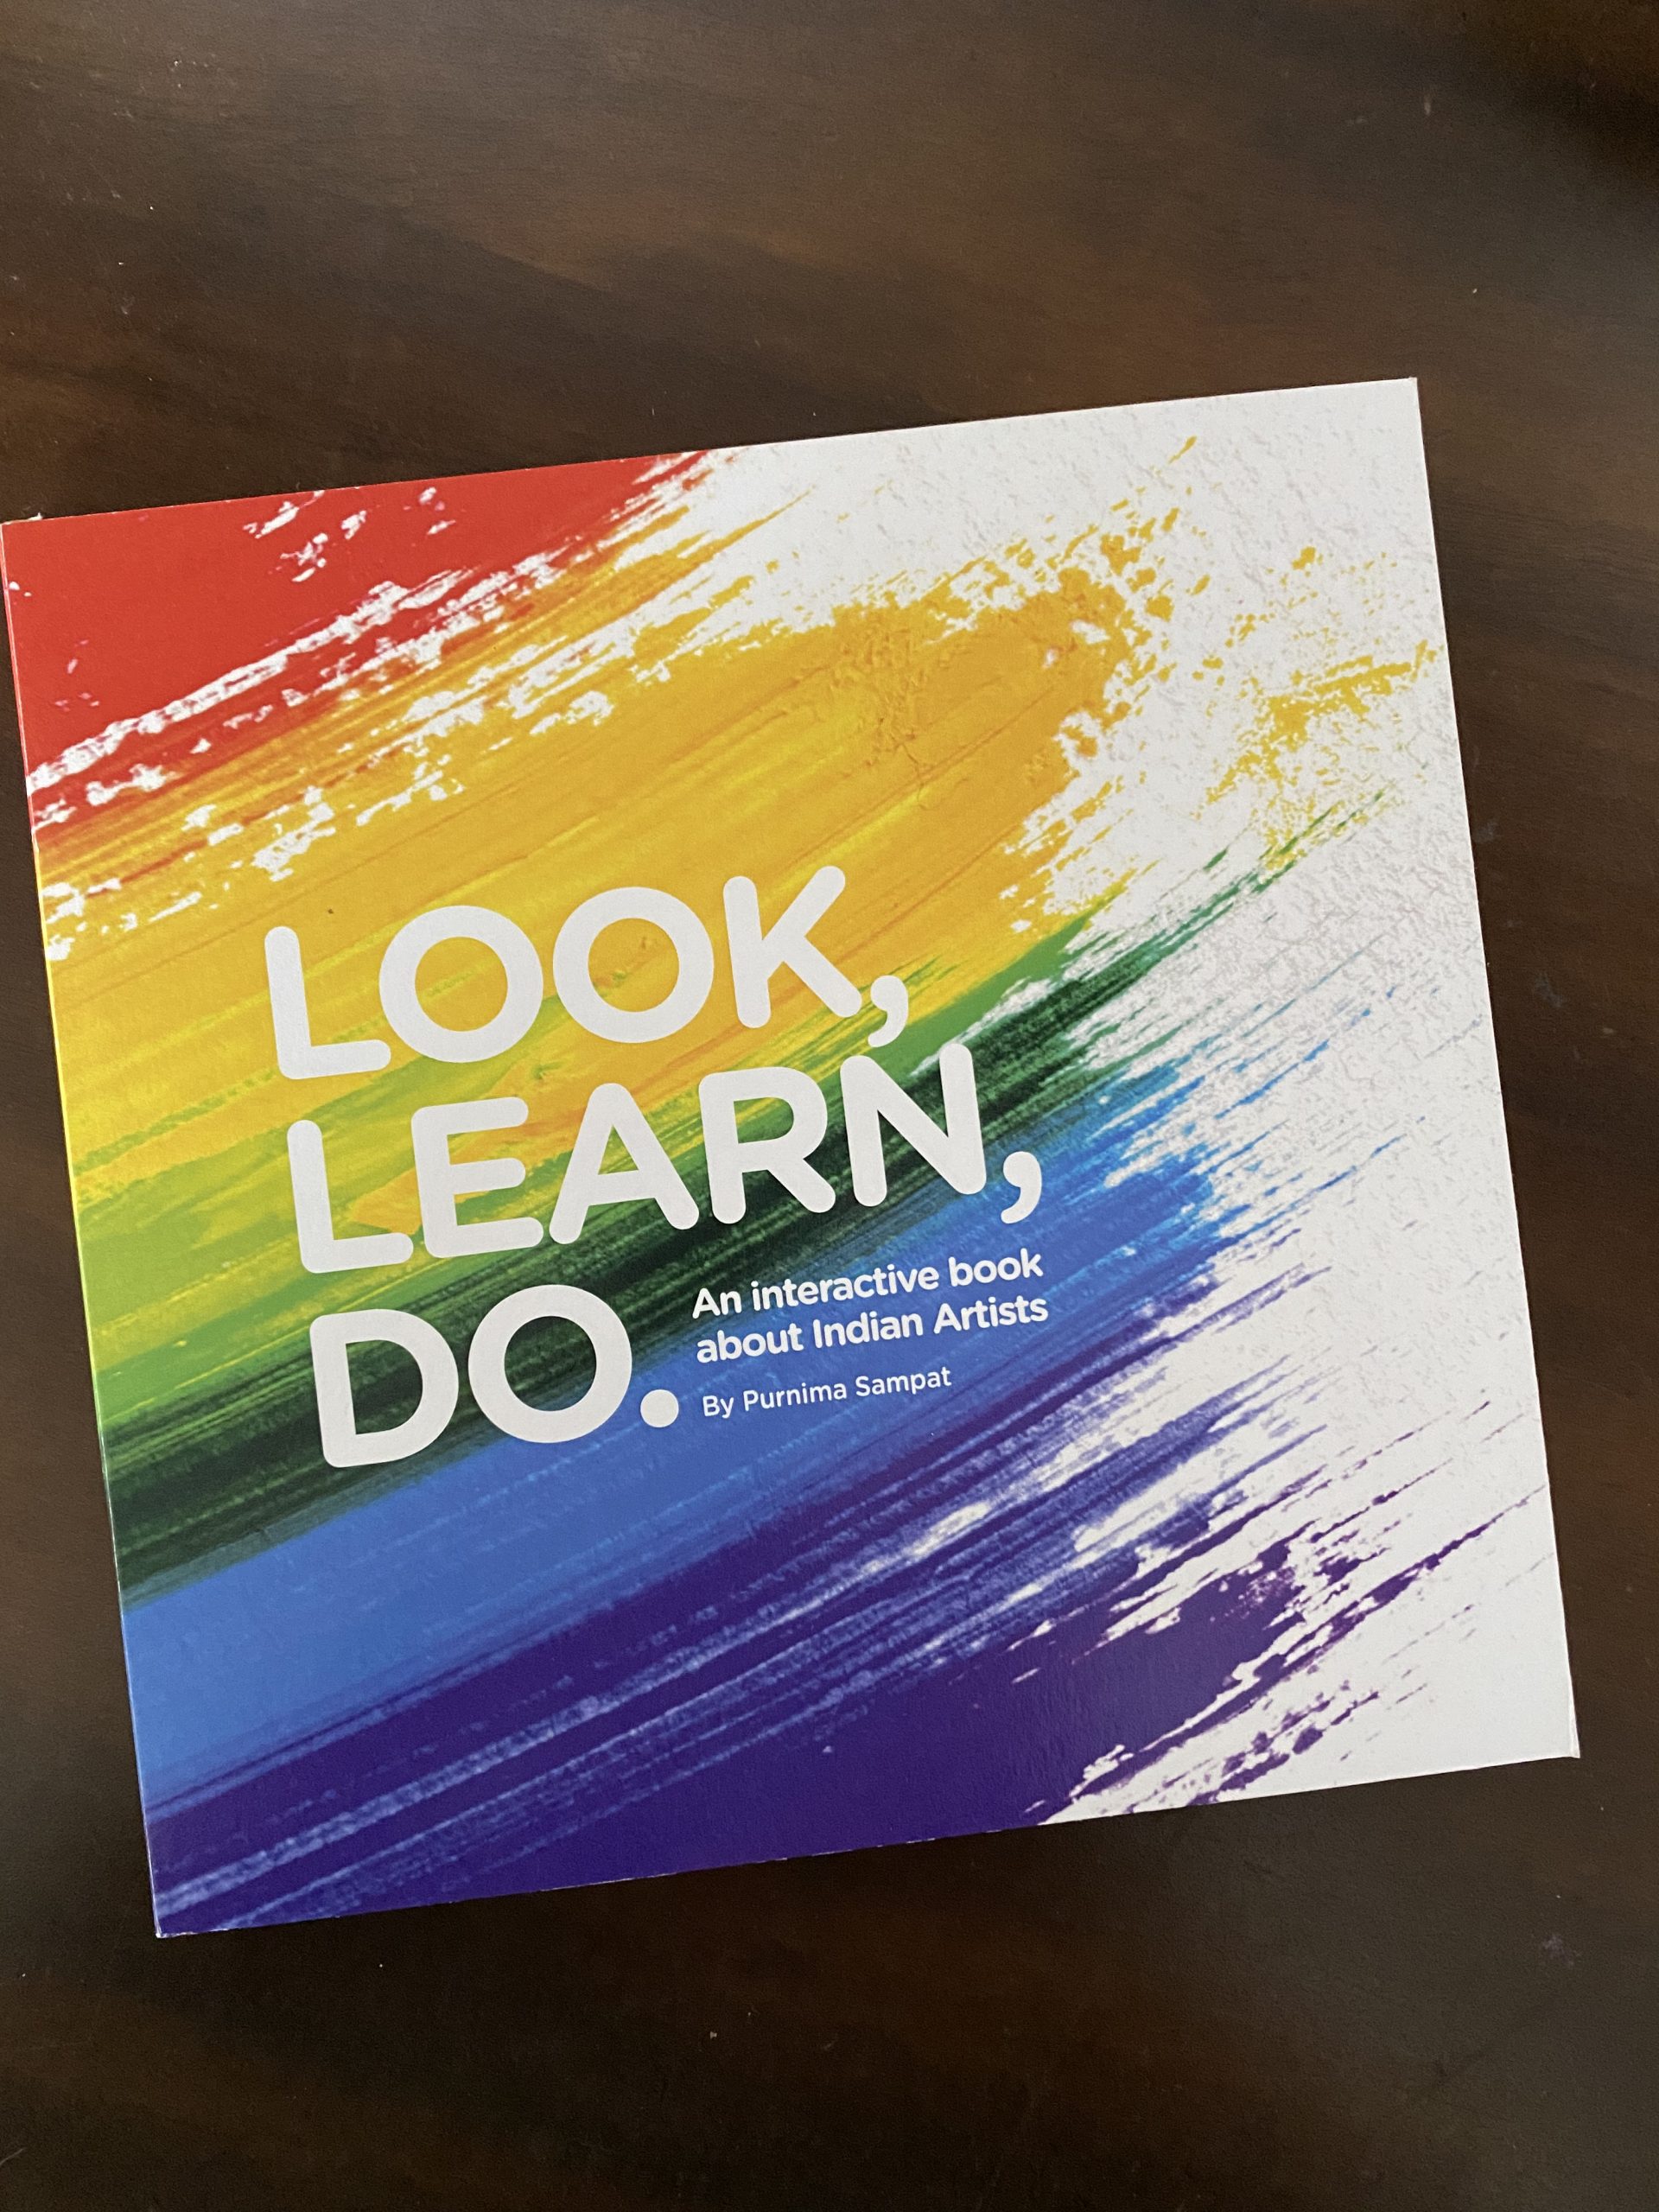 Look, Learn, Do- An interactive book about Indian artists by Purnima Sampat